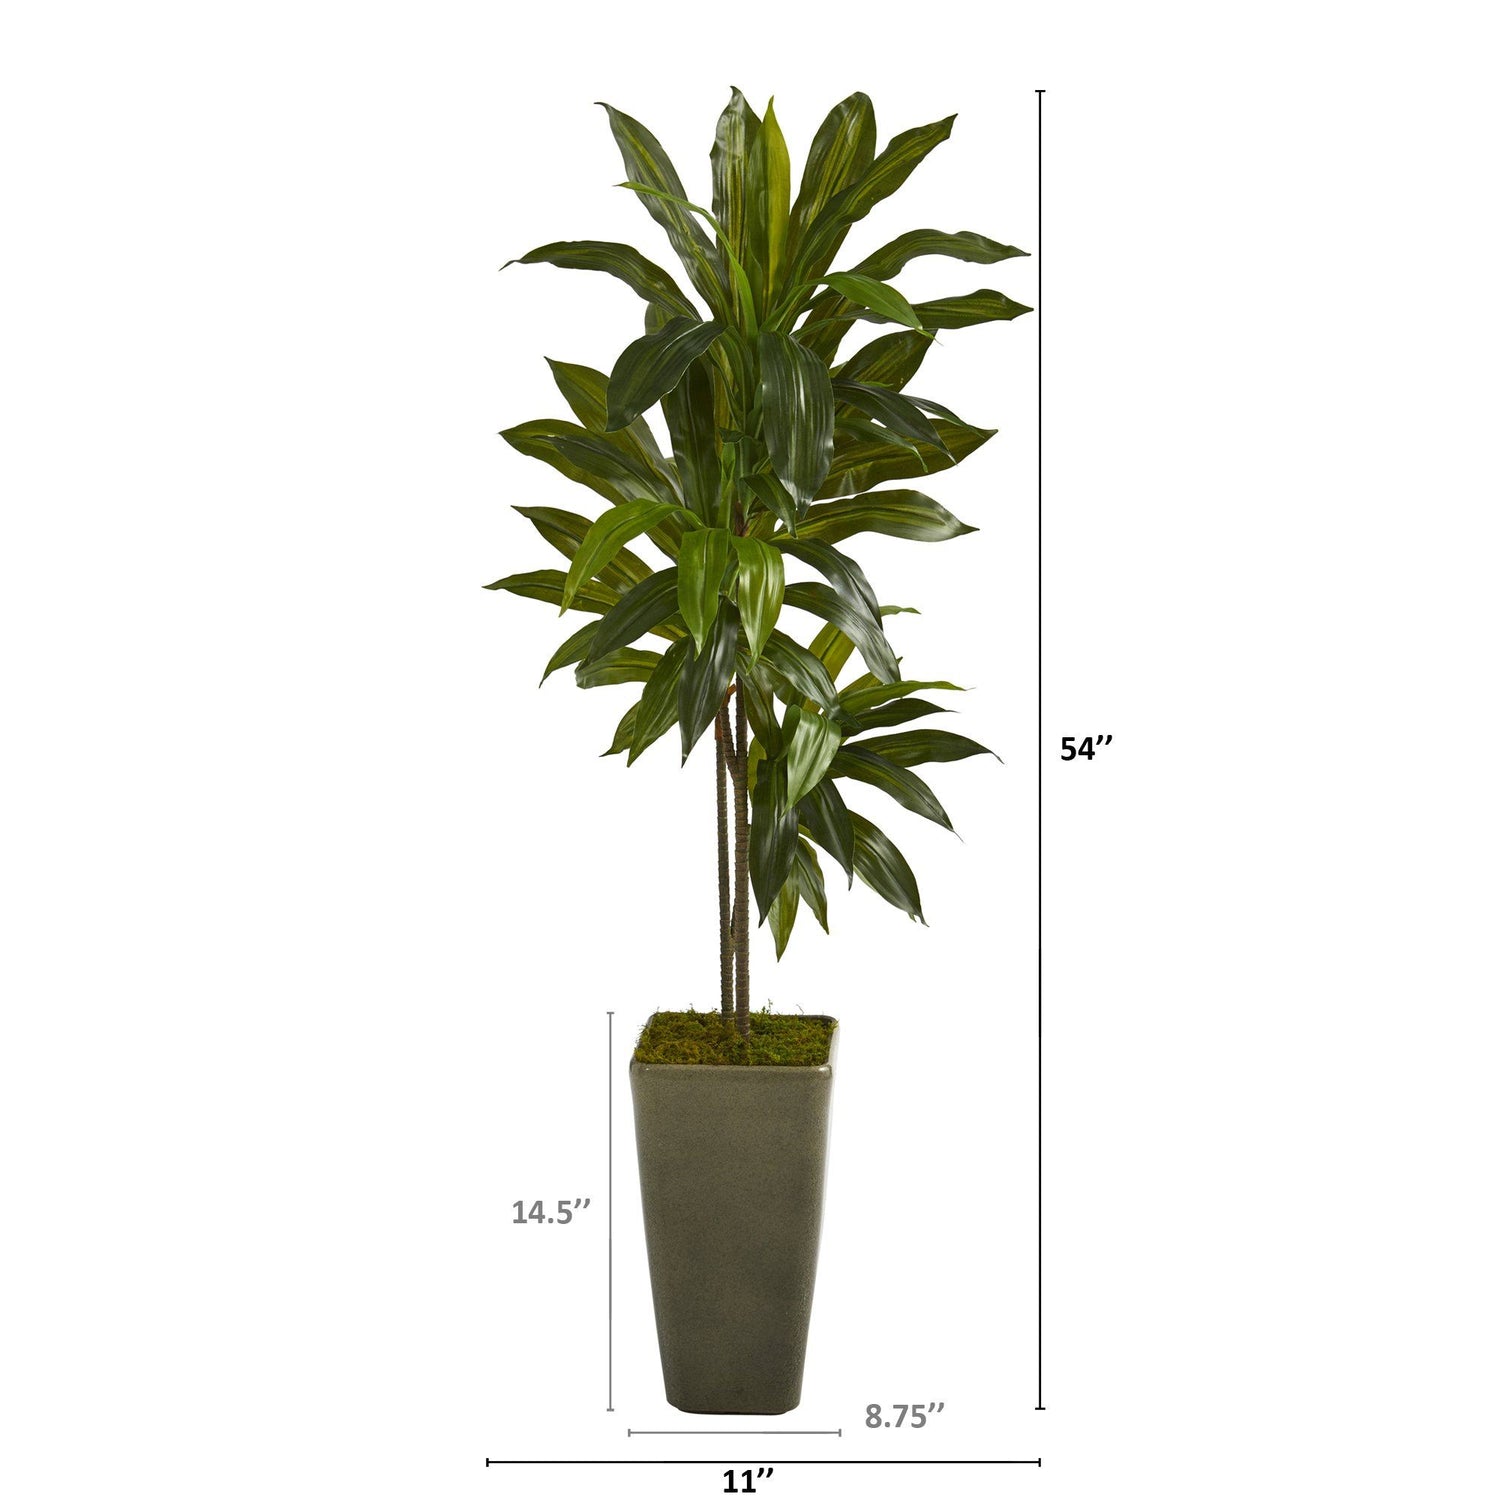 4.5’ Dracaena Artificial Plant in Green Planter (Real Touch)